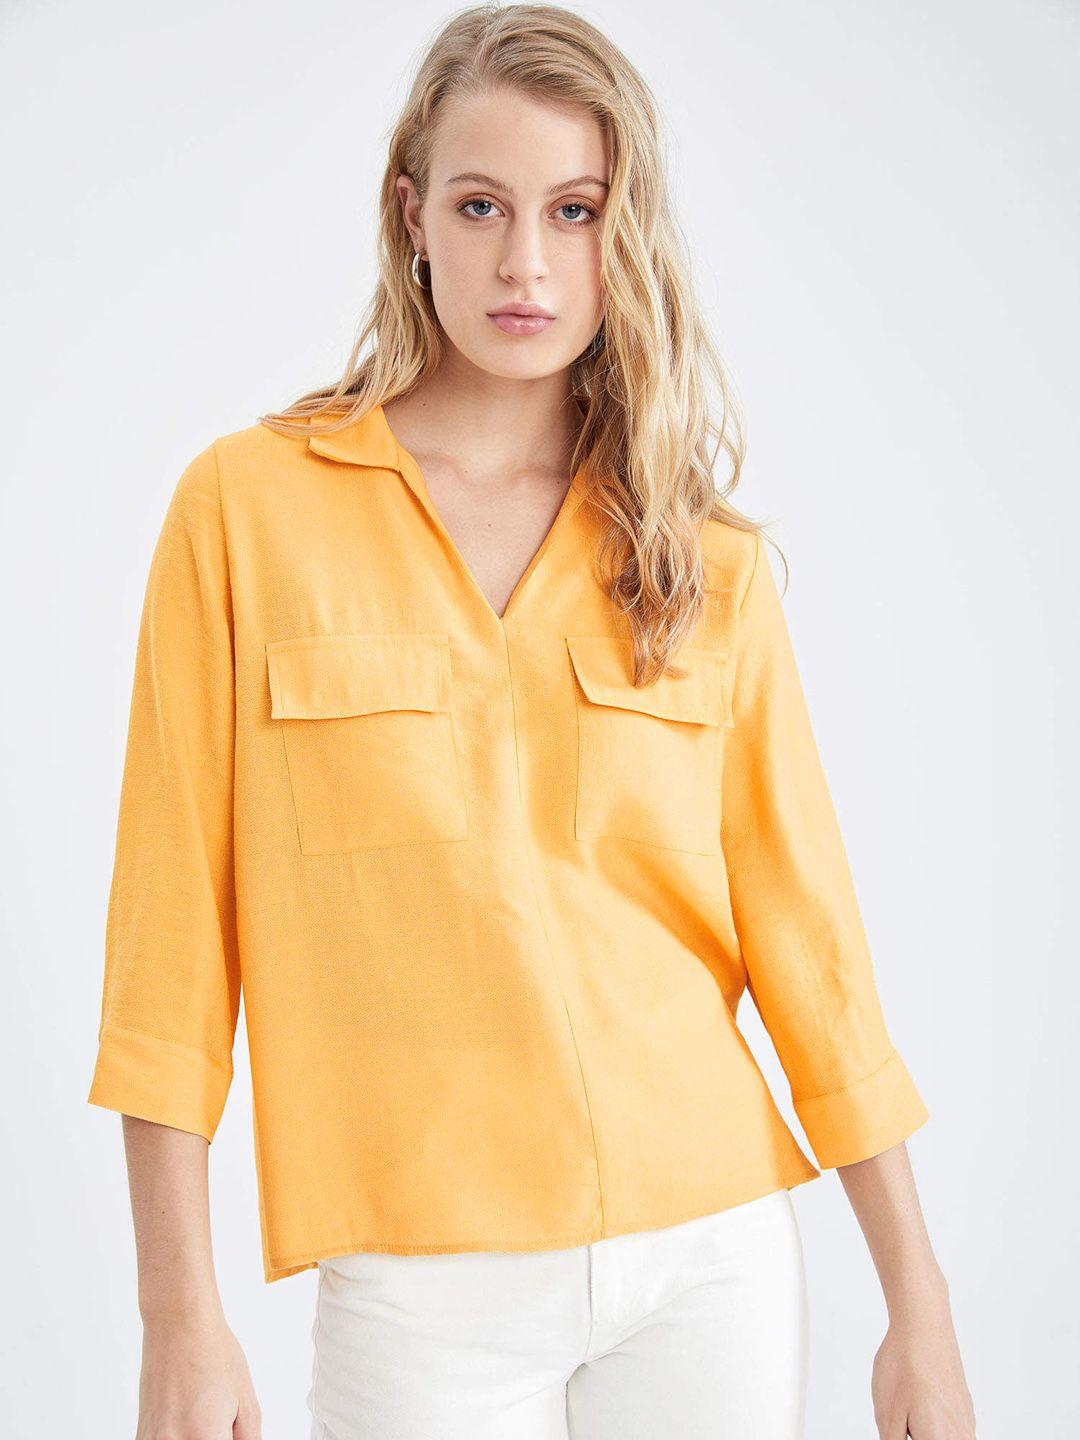 defacto women yellow solid shirt style top